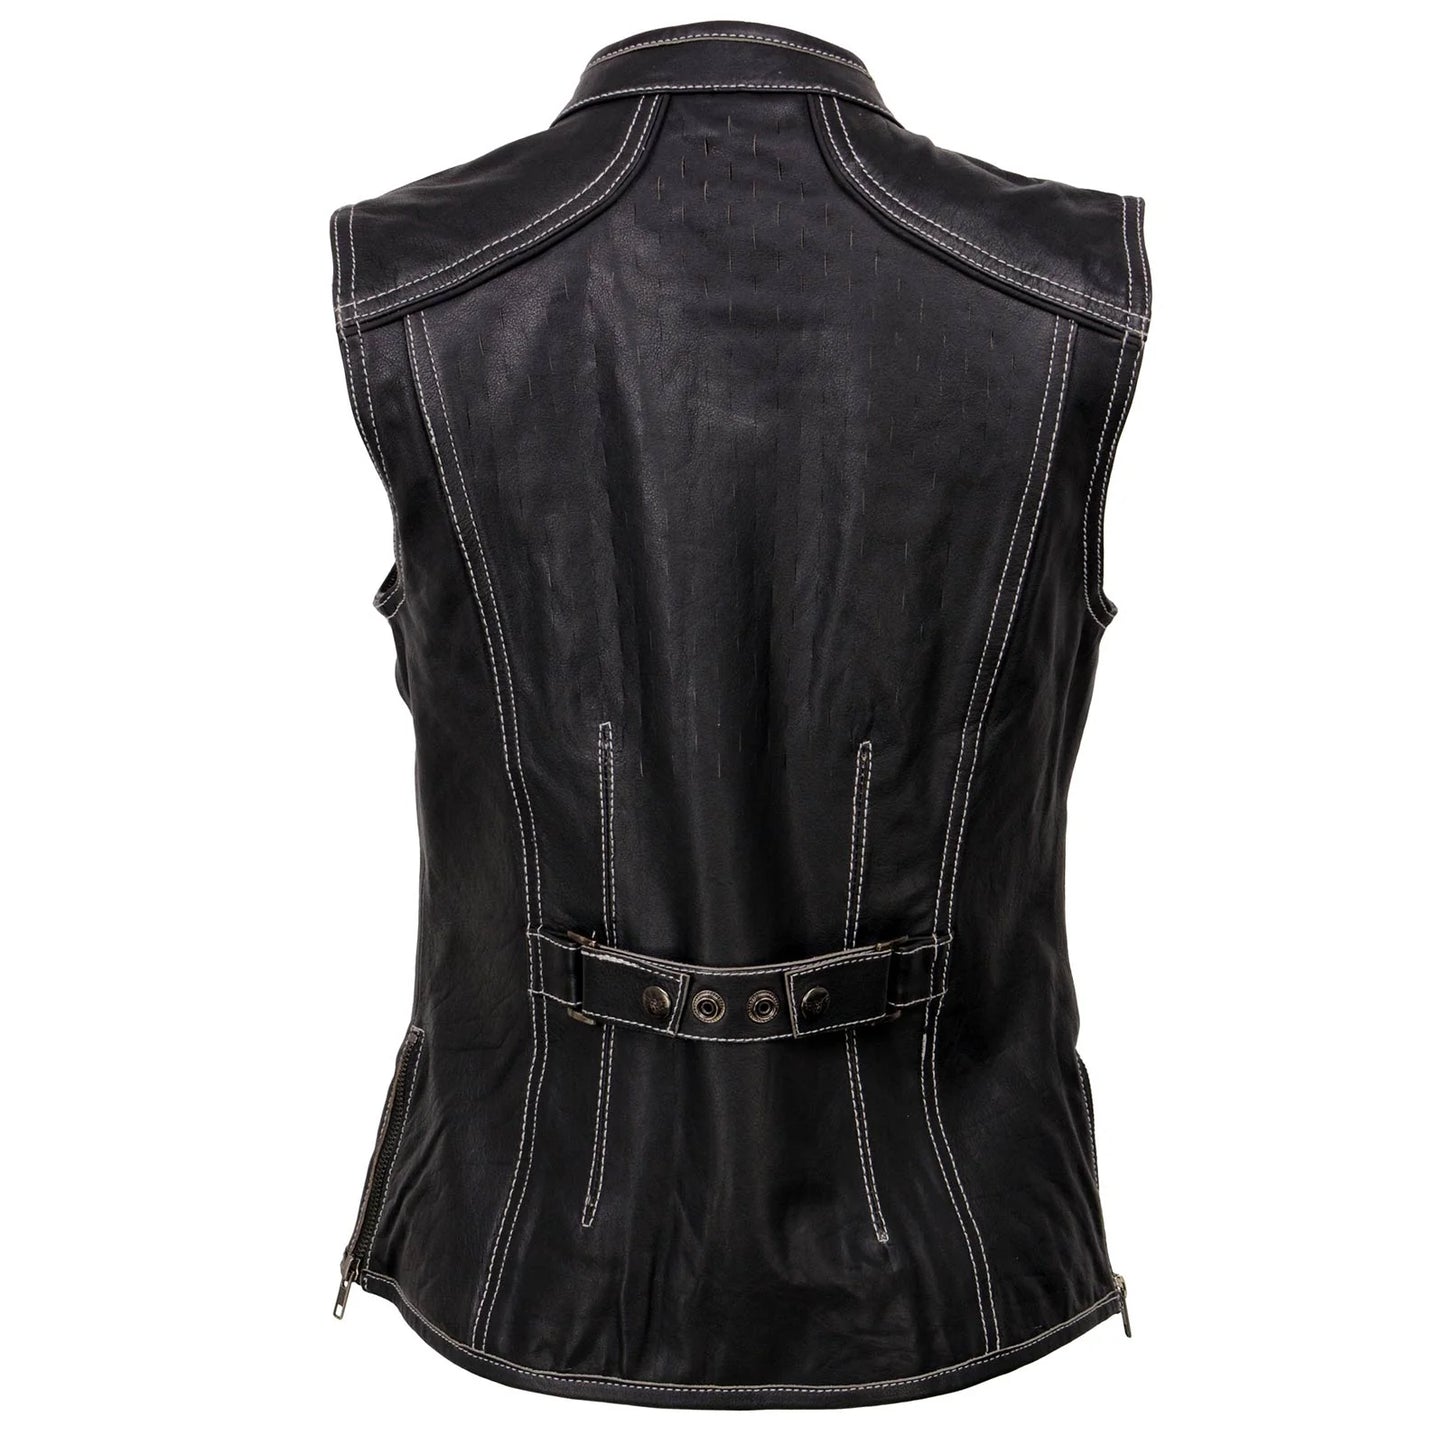 Women's Black Leather Grey Accented Laser Cut Vented Scuba Style Motorcycle Rider Vest